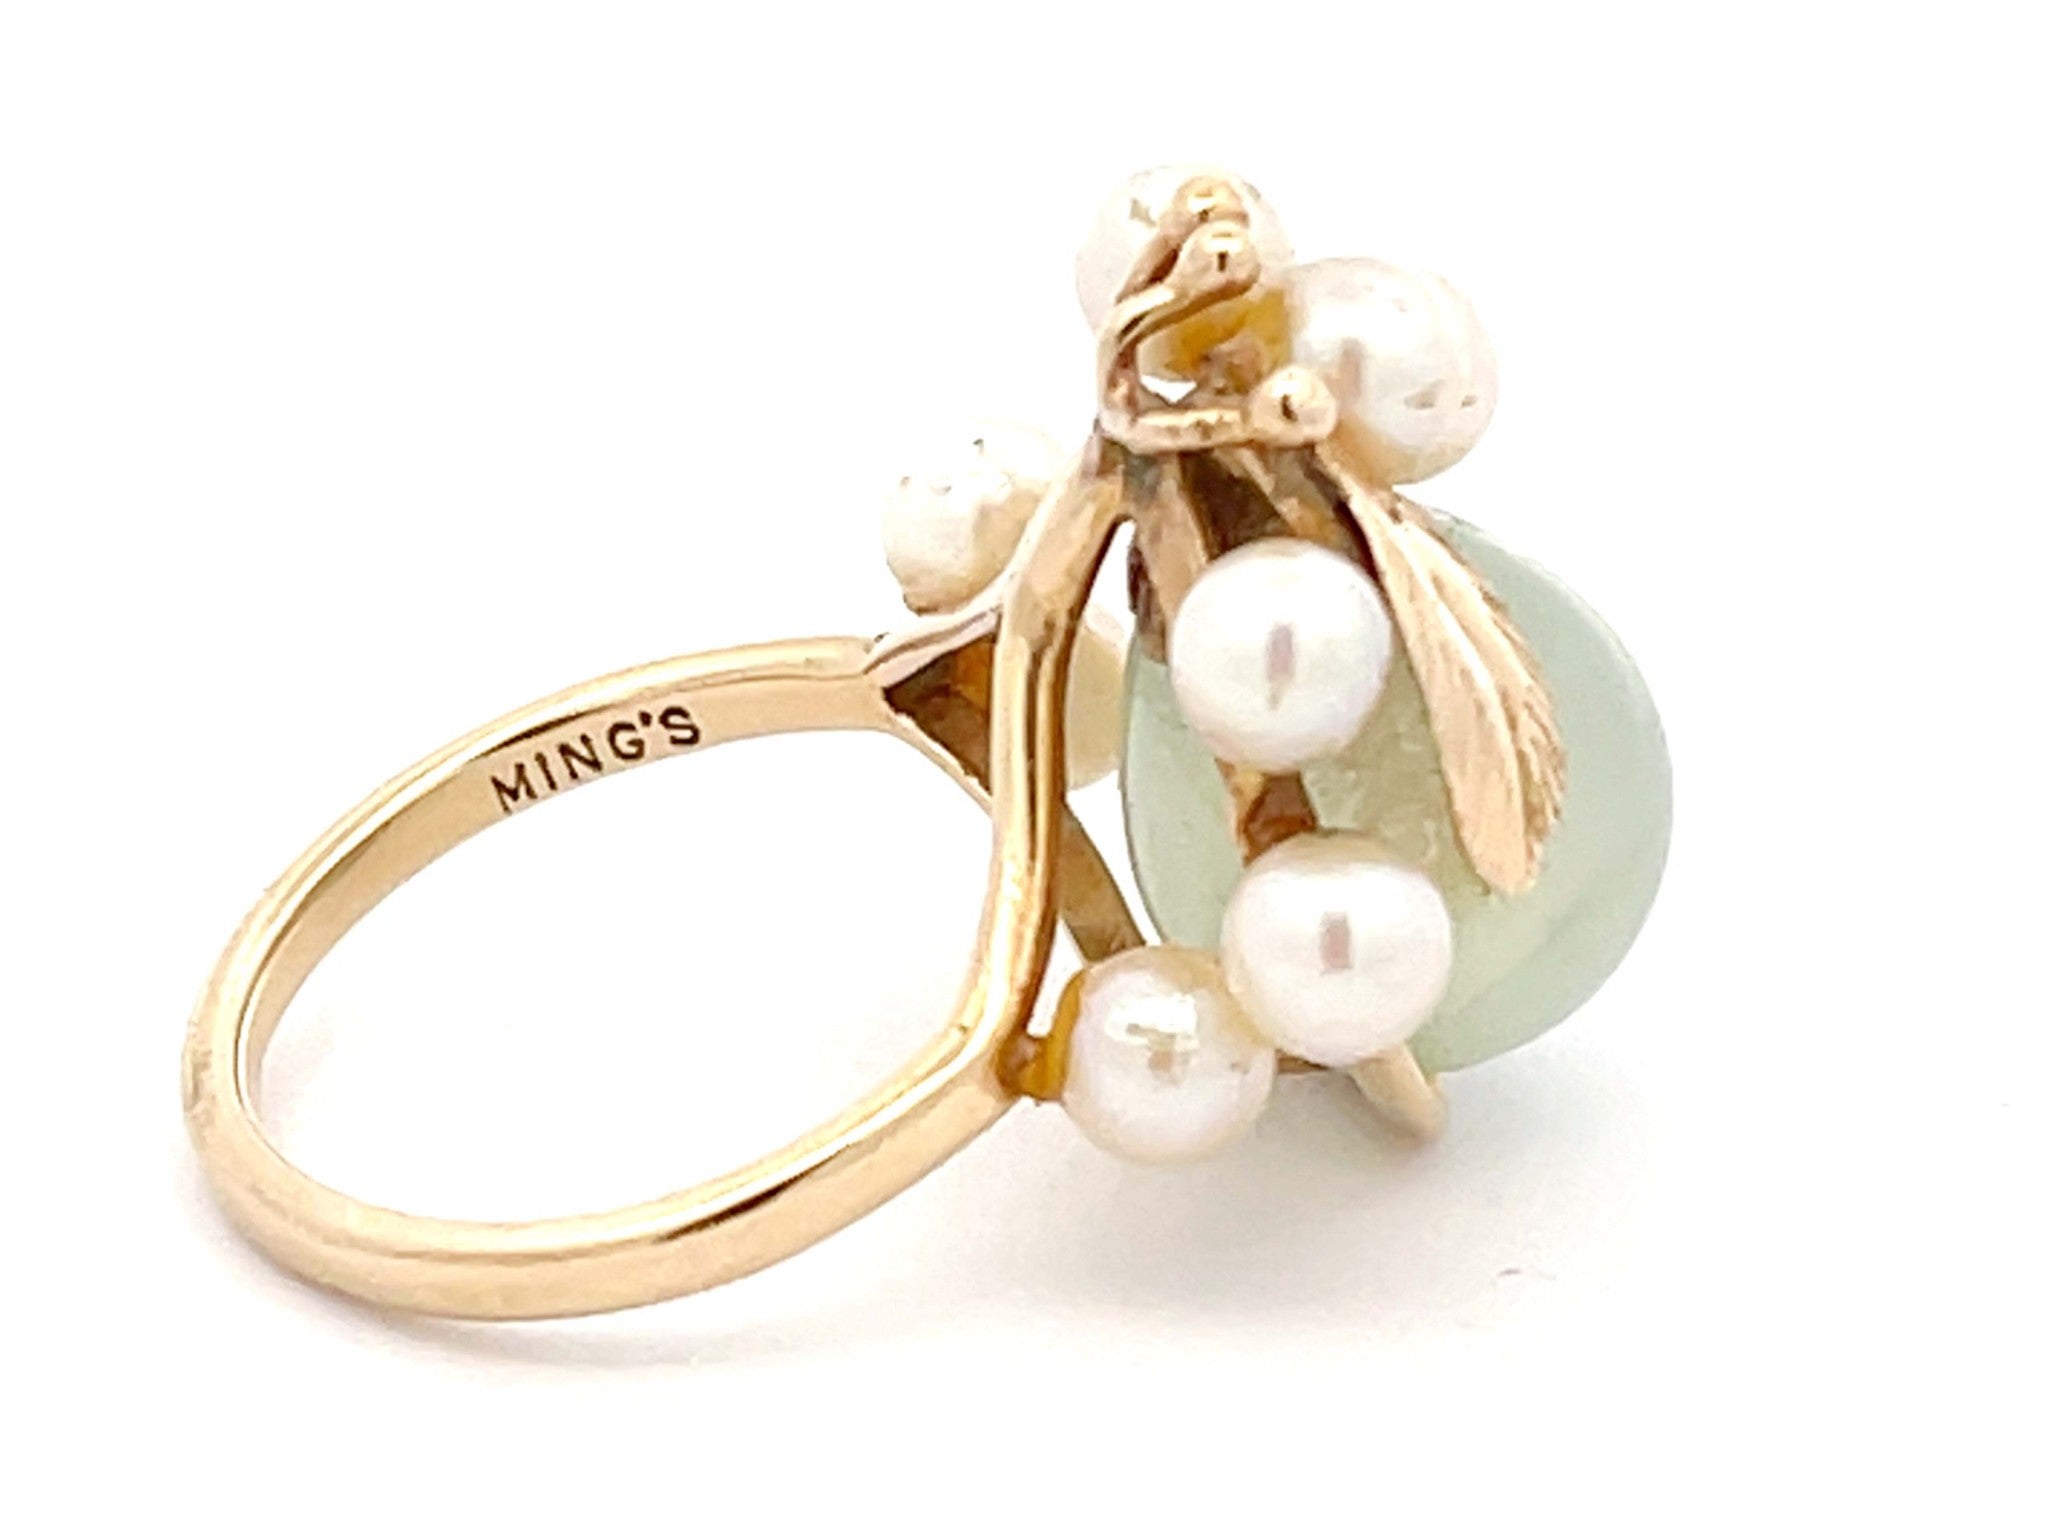 Mings Green Pear Shaped Jade and Pearl Leaf Design Ring in 14k Yellow Gold